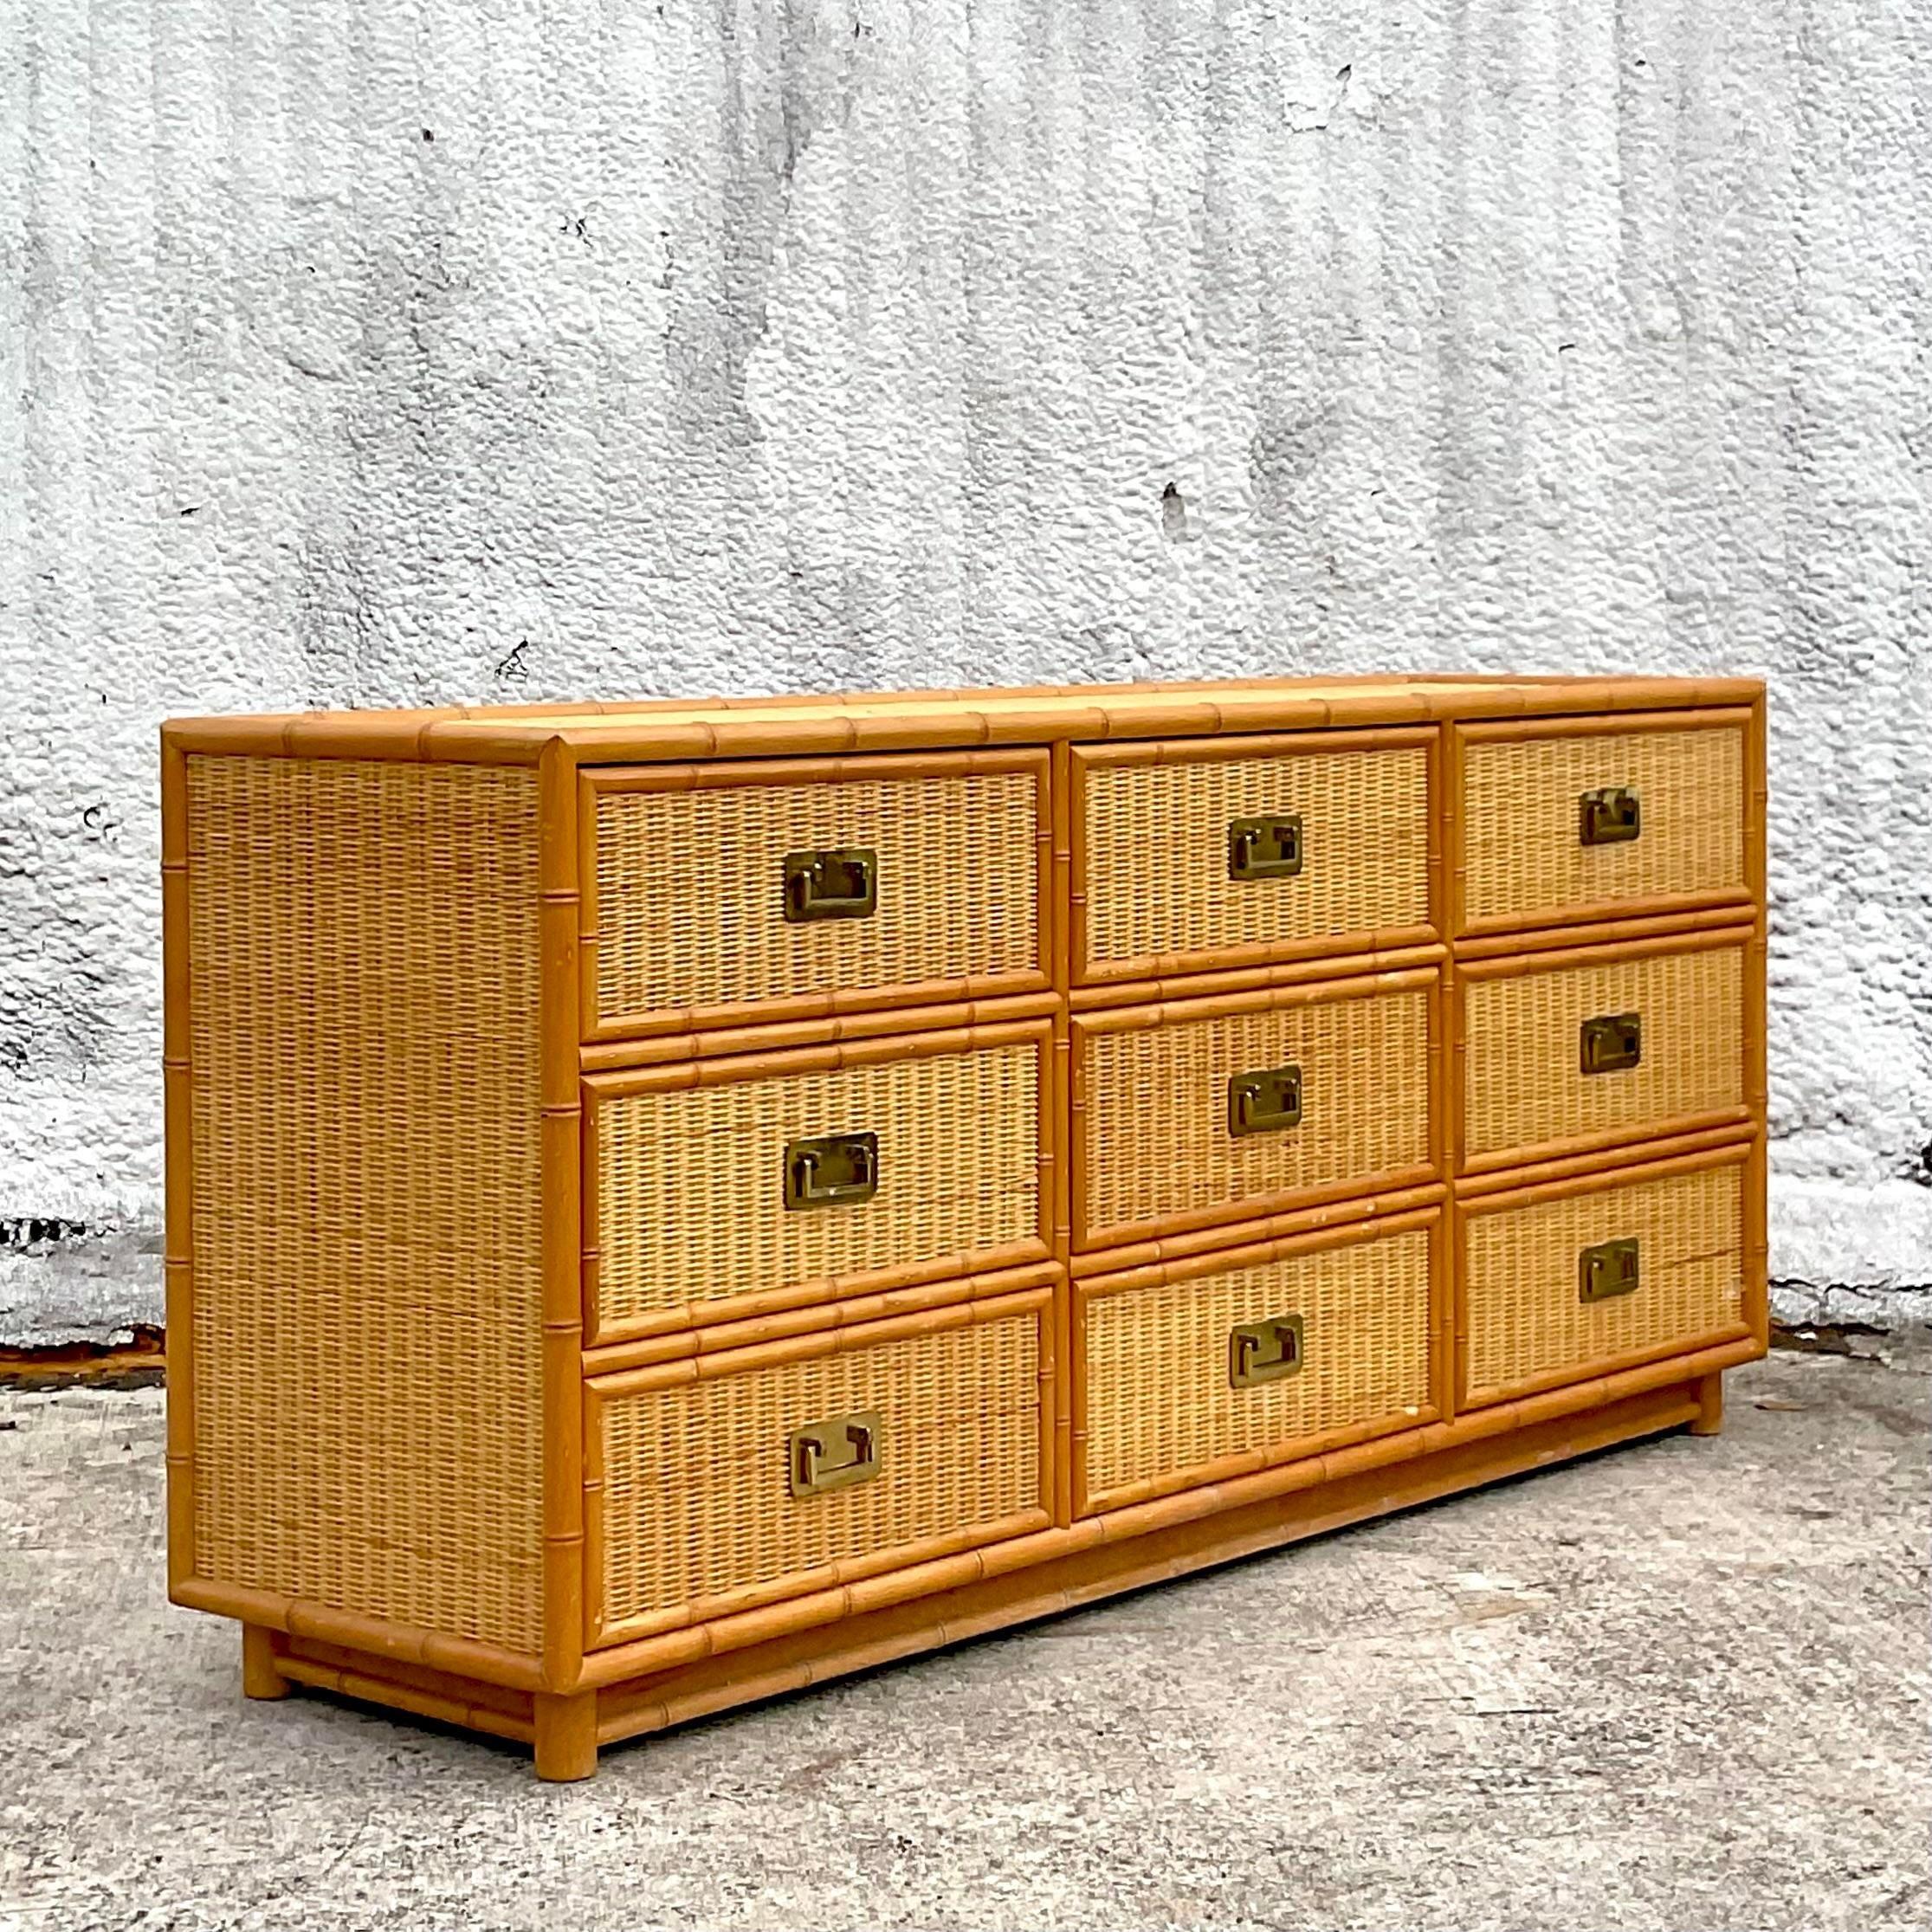 A fabulous vintage Coastal 9 drawer dresser. Chic woven rattan panels with a carved bamboo trim. Gorgeous brass campaign hardware. Acquired from a Palm Beach estate.